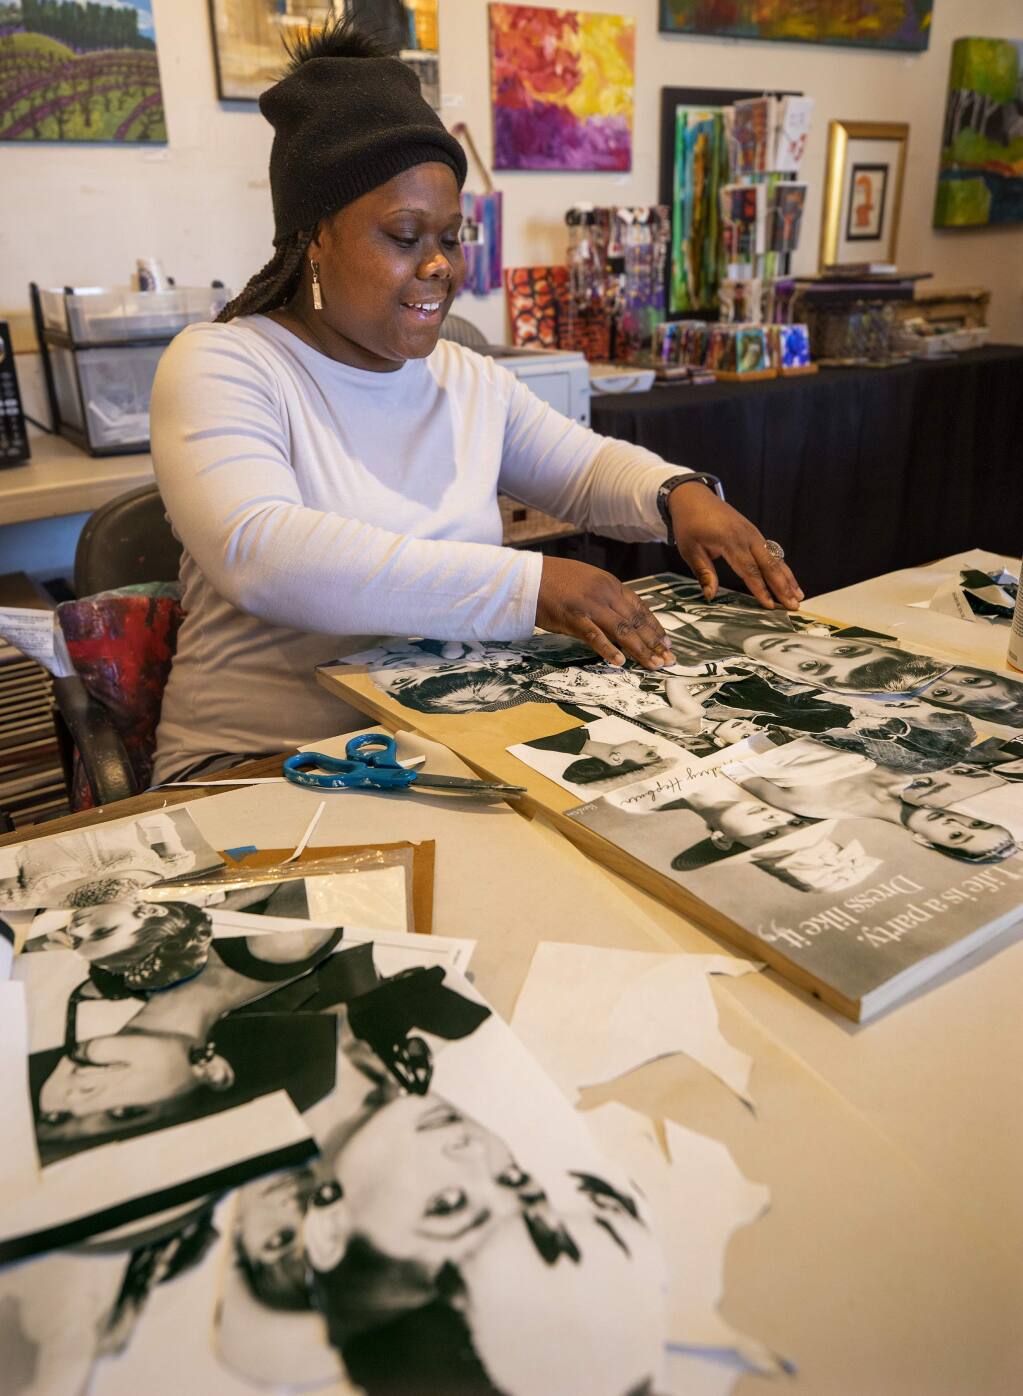 Collage artist Frances Reese creates an Audrey Hepburn piece because she likes icons. Reese likes experimenting with new art styles she finds on YouTube at the Becoming Independent Professional Art Program in the Fulton Crossing Galleries in Santa Rosa. (photo by John Burgess/The Press Democrat)